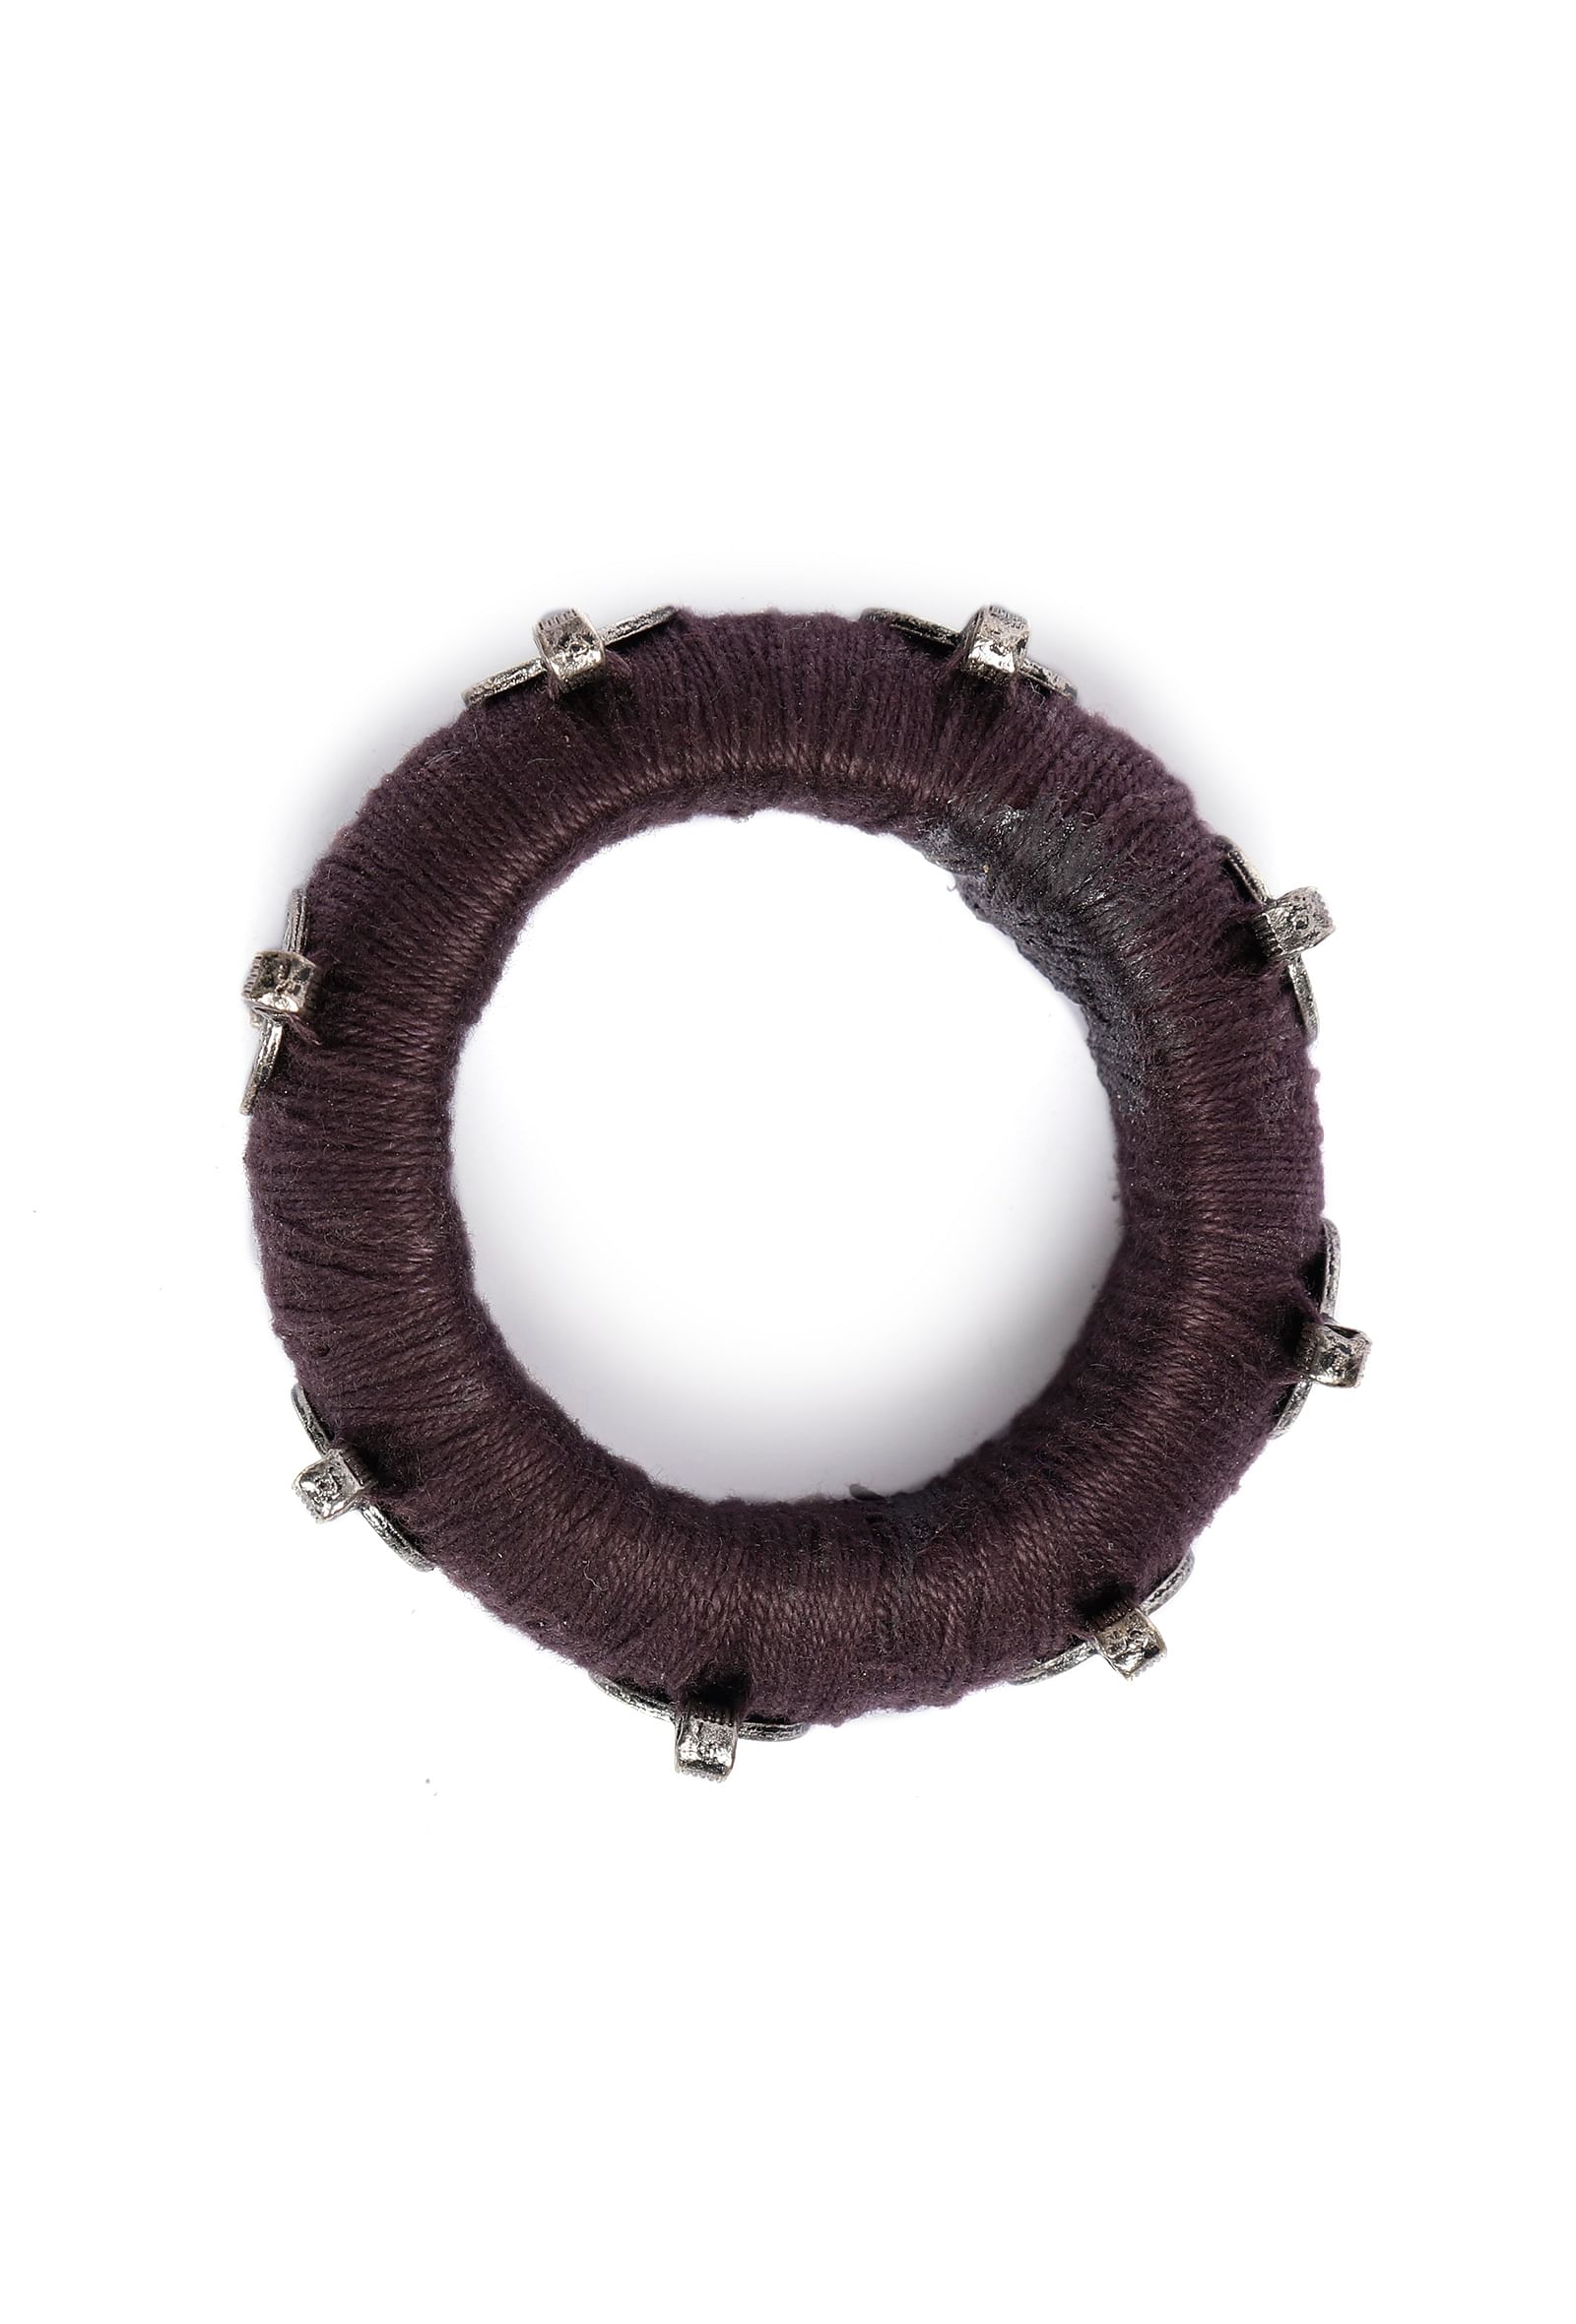 Onyx Brown Thread Wooden Bangles